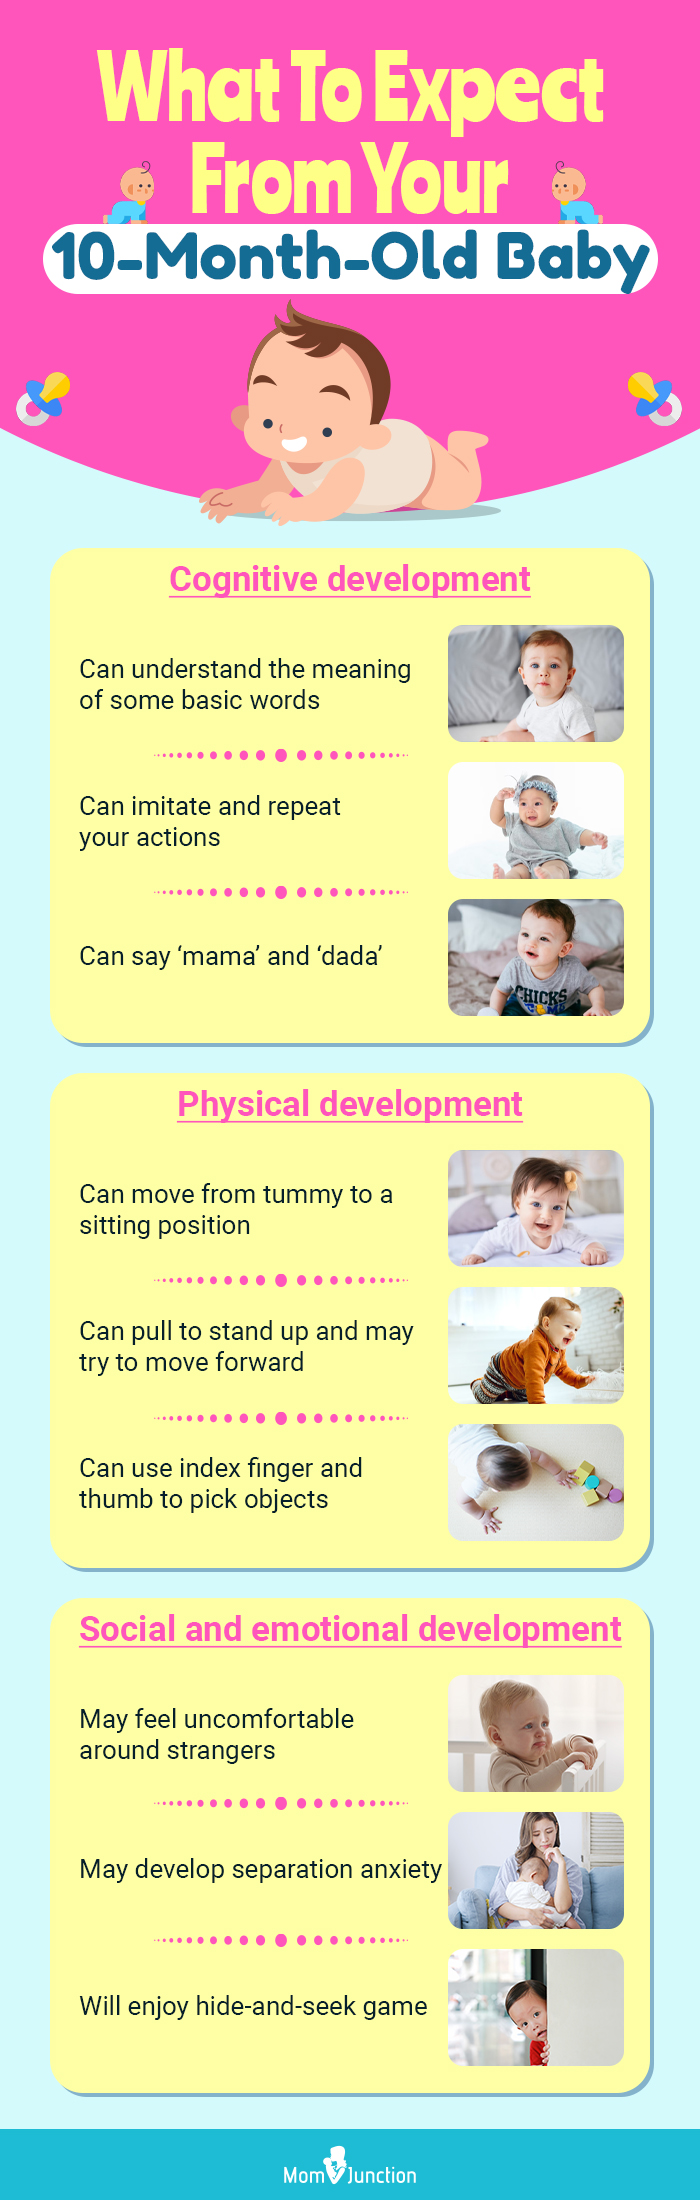 10-Month-Old Baby: Development, Milestones And Growth